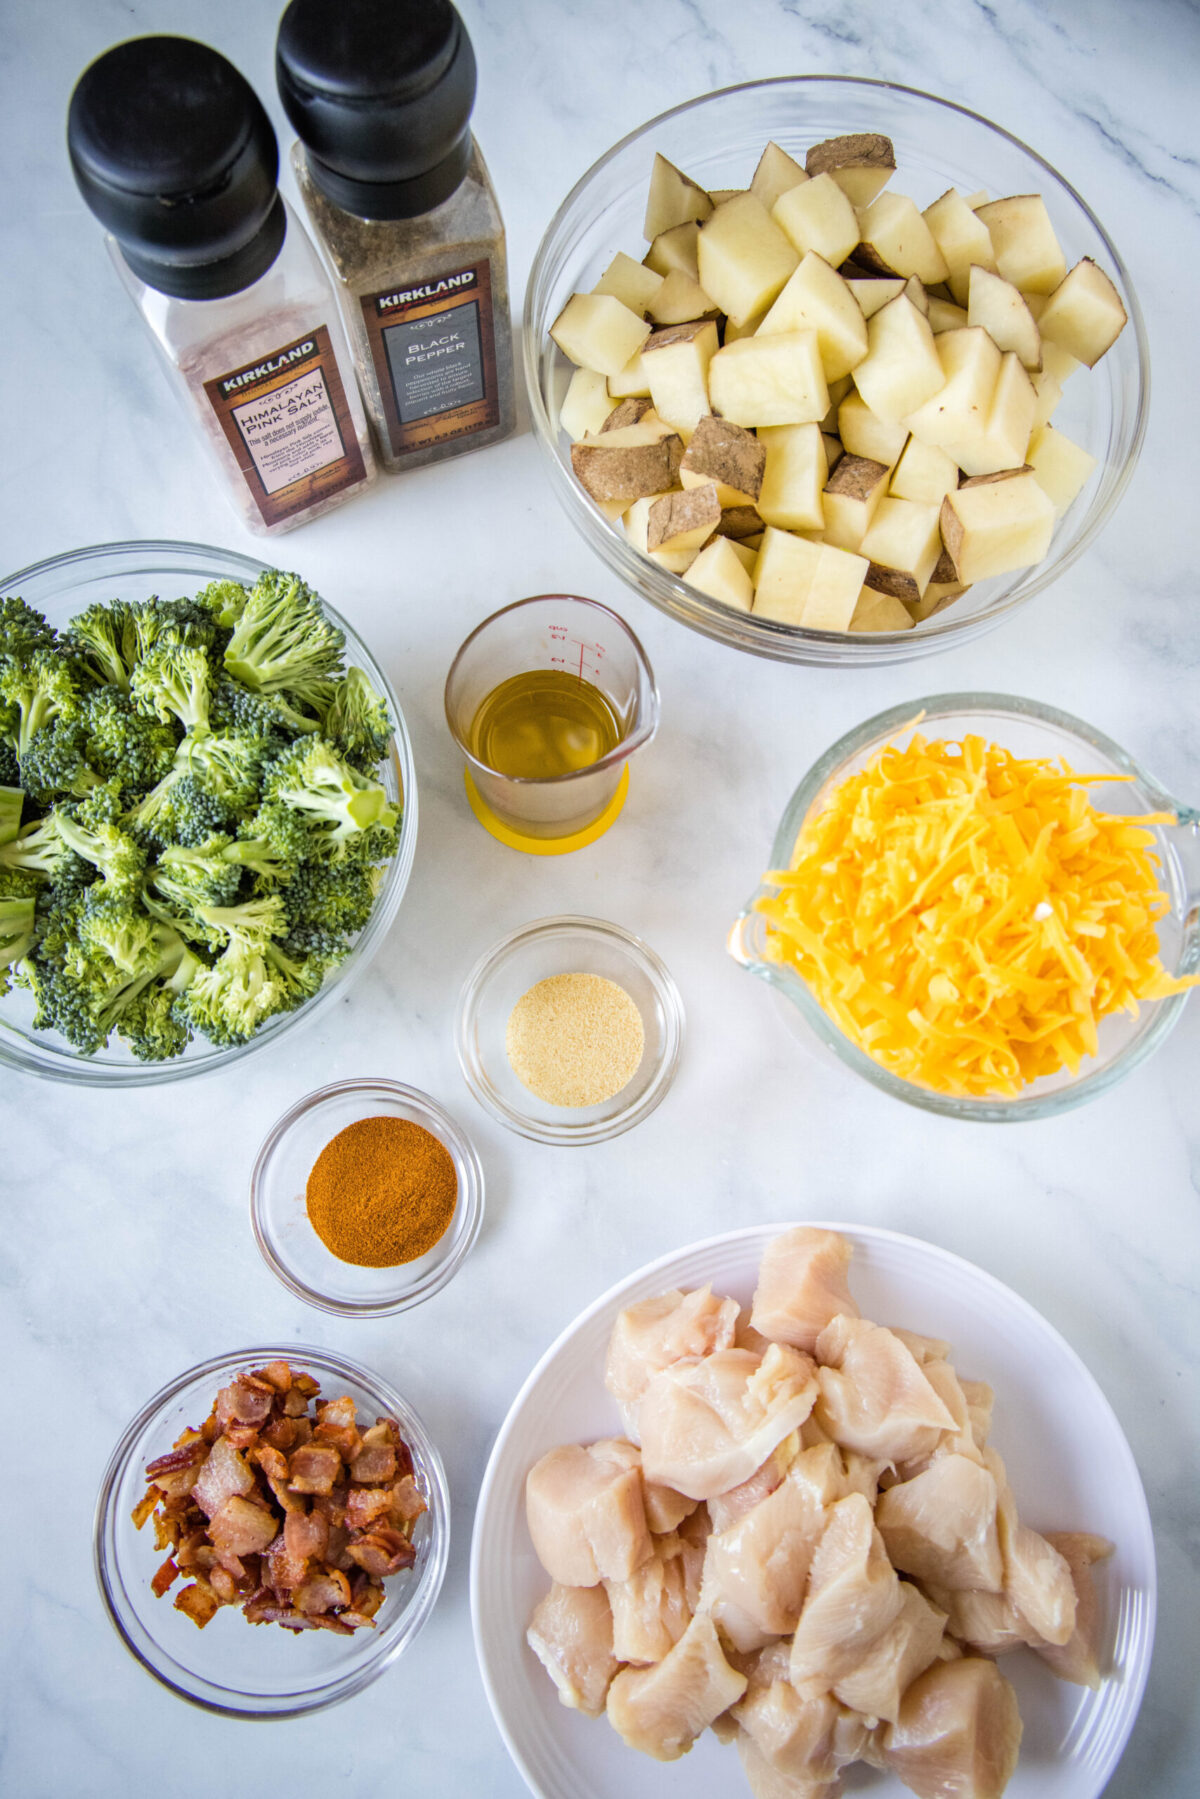 Overhead view of the ingredients needed for loaded chicken potato casserole: a bowl of diced potatoes, a bowl of broccoli, a bowl of cubed chicken breast, a bowl of bacon crumbles, a bowl of shredded cheese, a bowl of paprika, a bowl of garlic powder, a bowl of olive oil, and a salt and pepper shaker.